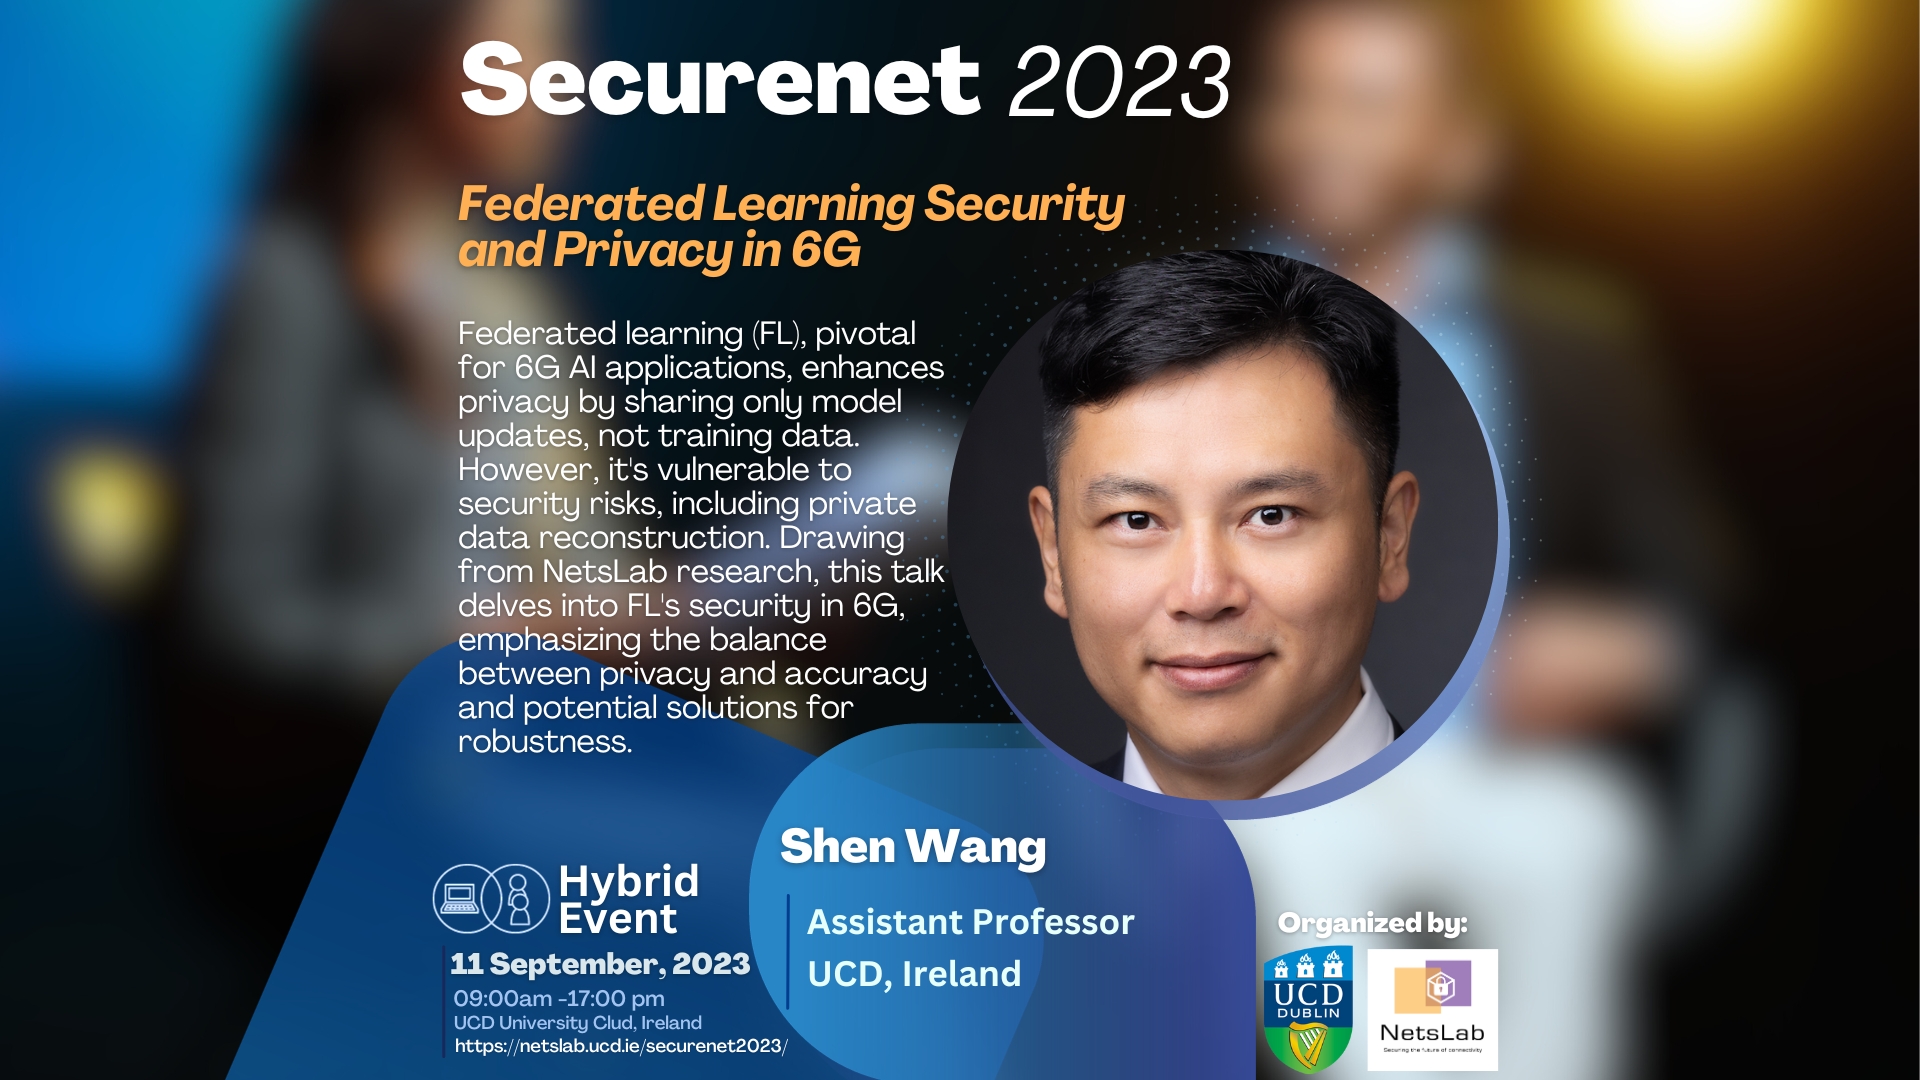 SECURENET 2023 - Federated Learning Security and Privacy in 6G - Shen Wang